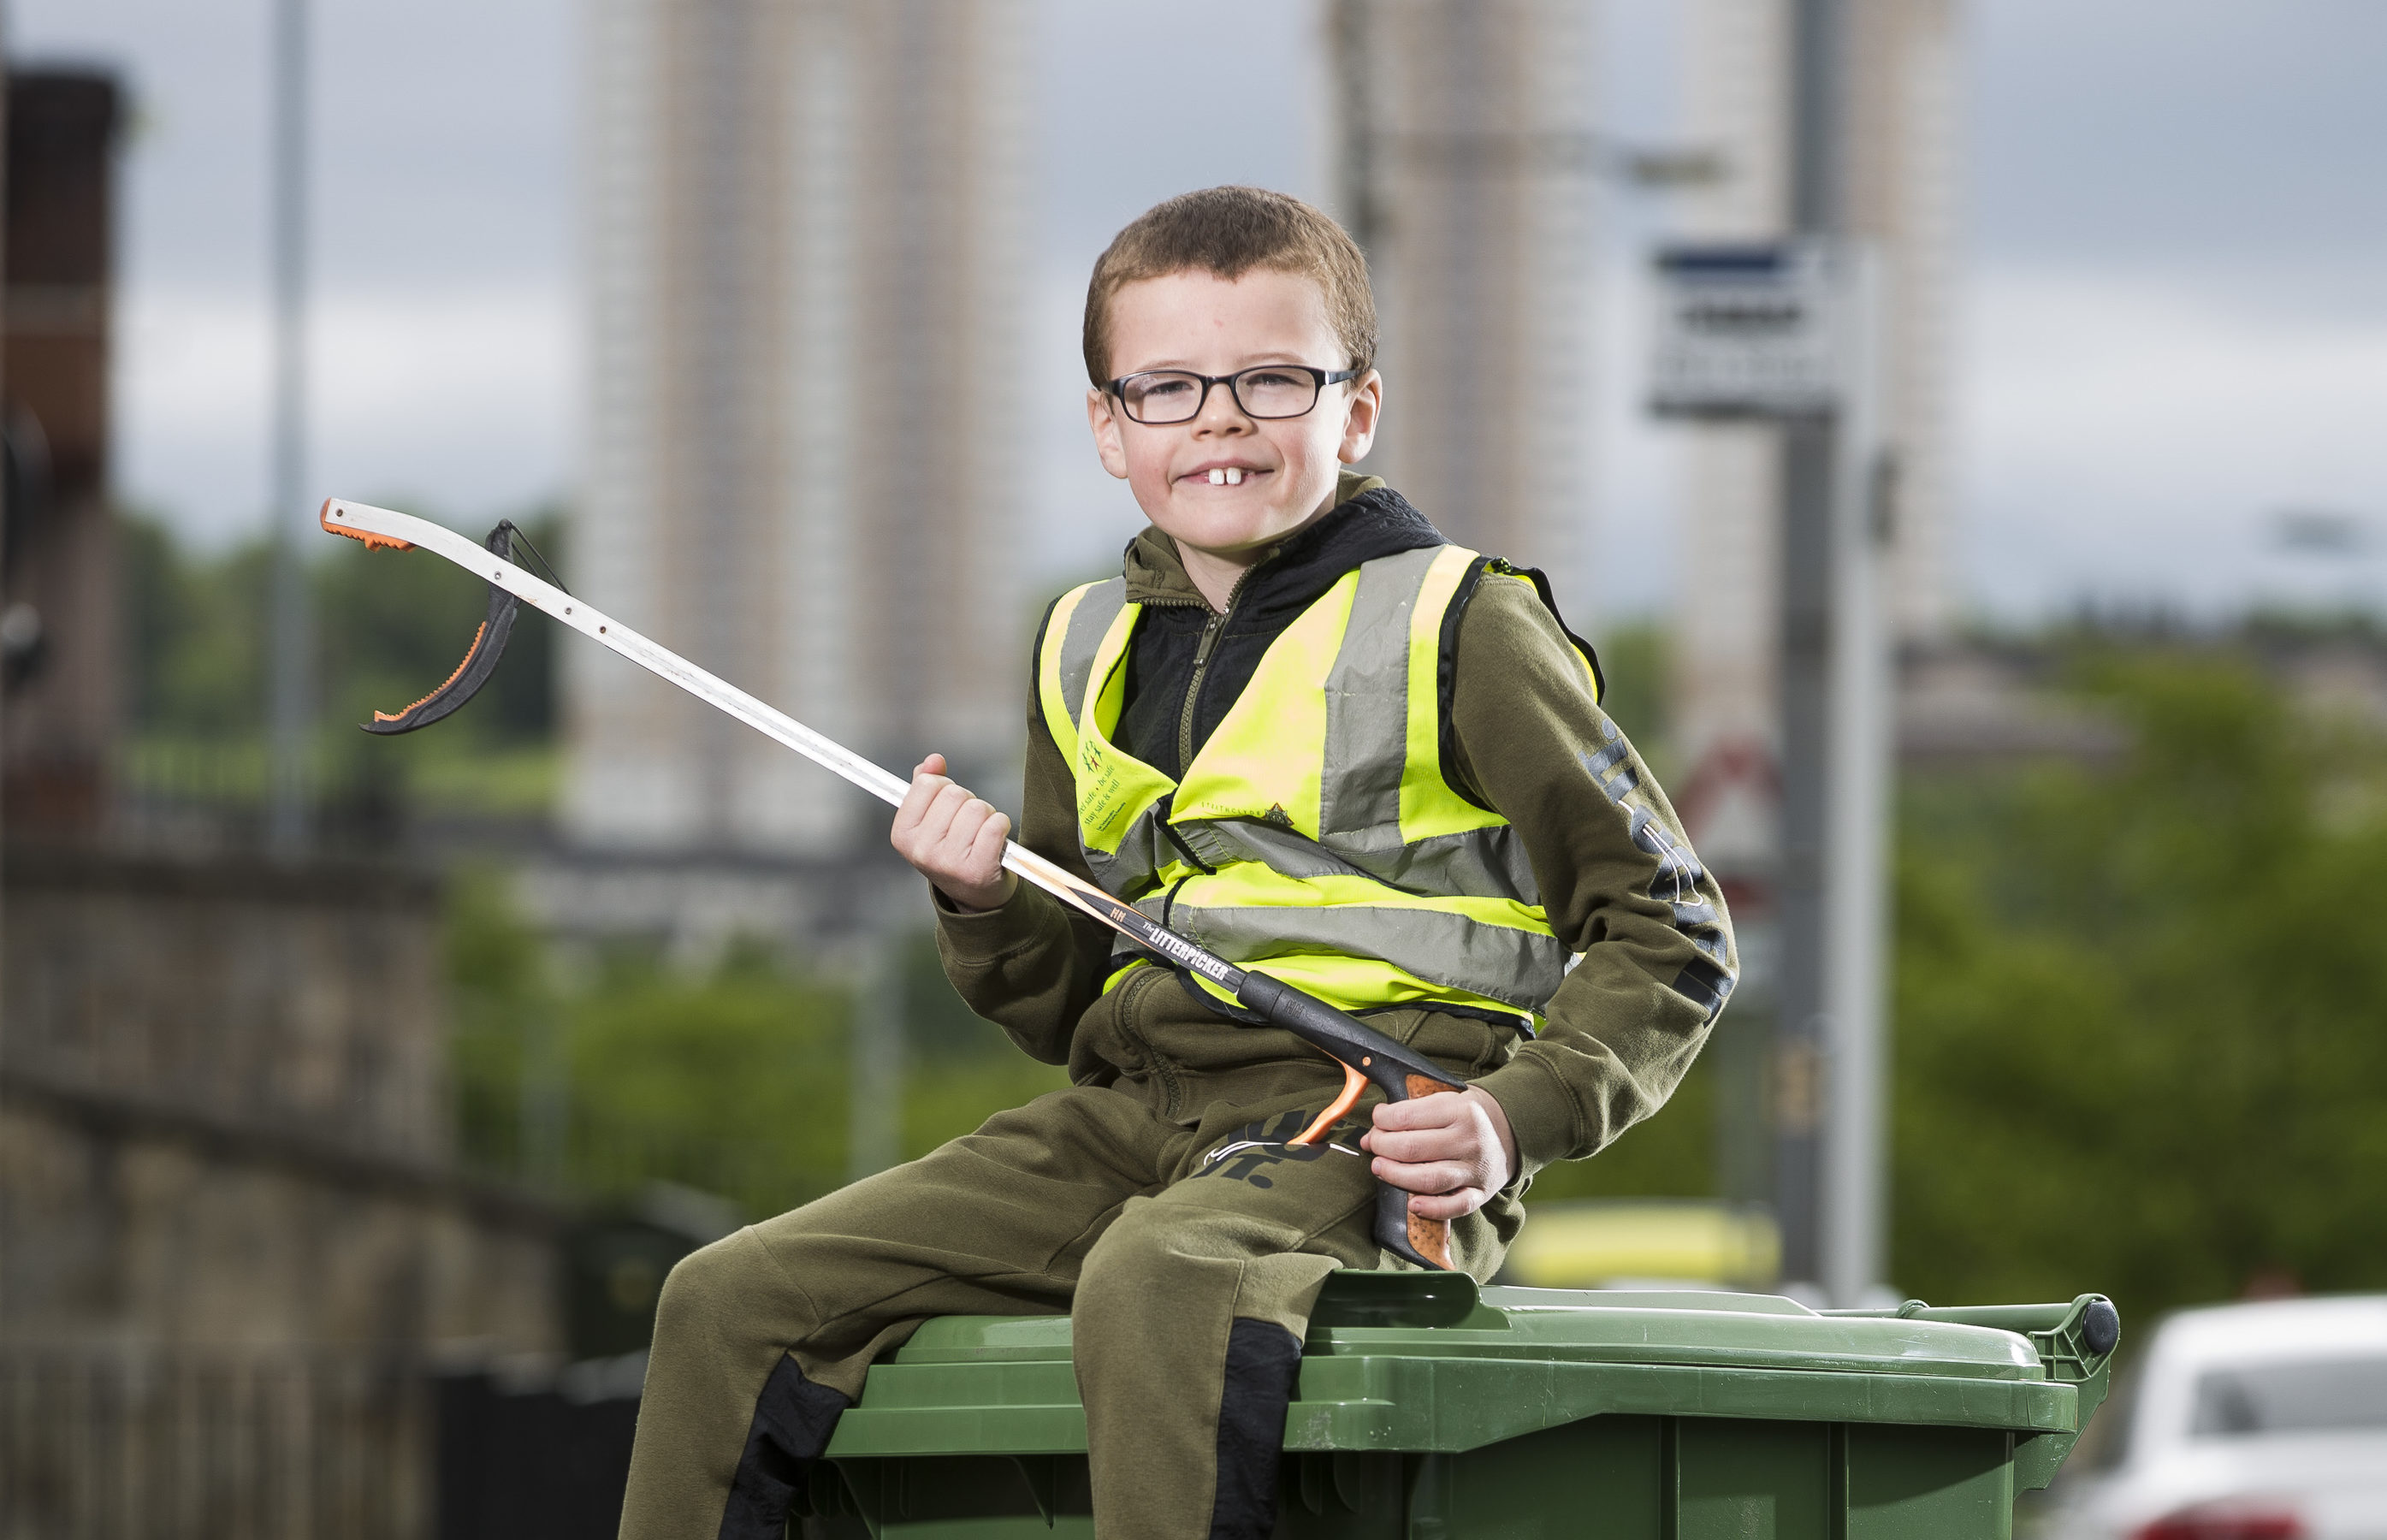 8 year old Marc O’Neill from Milton, Glasgow